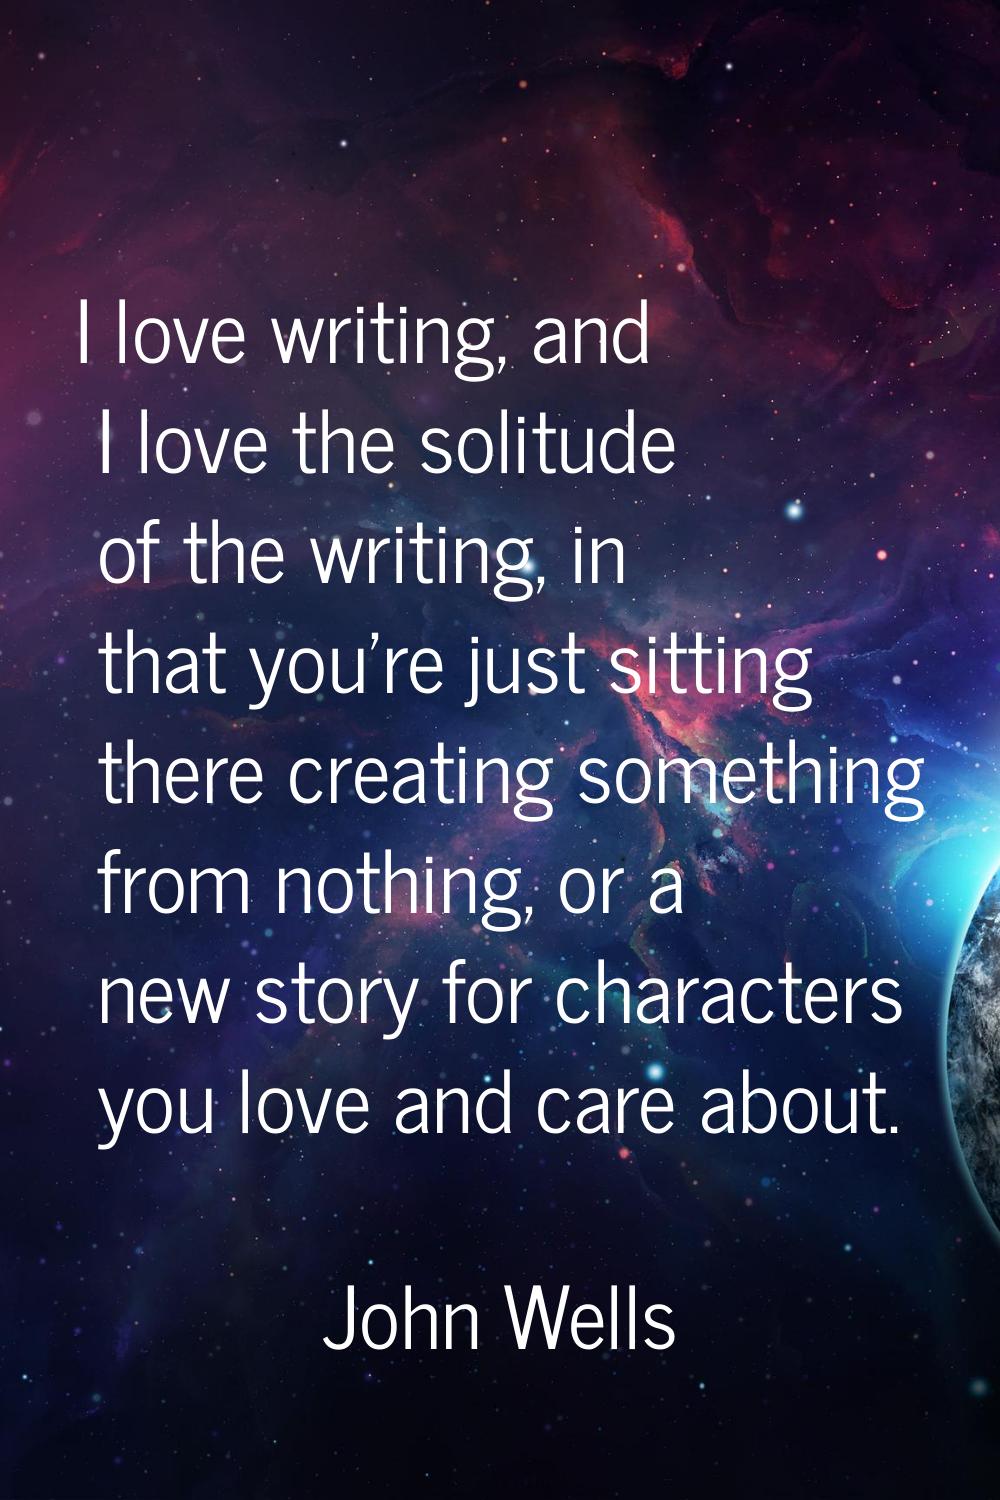 I love writing, and I love the solitude of the writing, in that you're just sitting there creating 